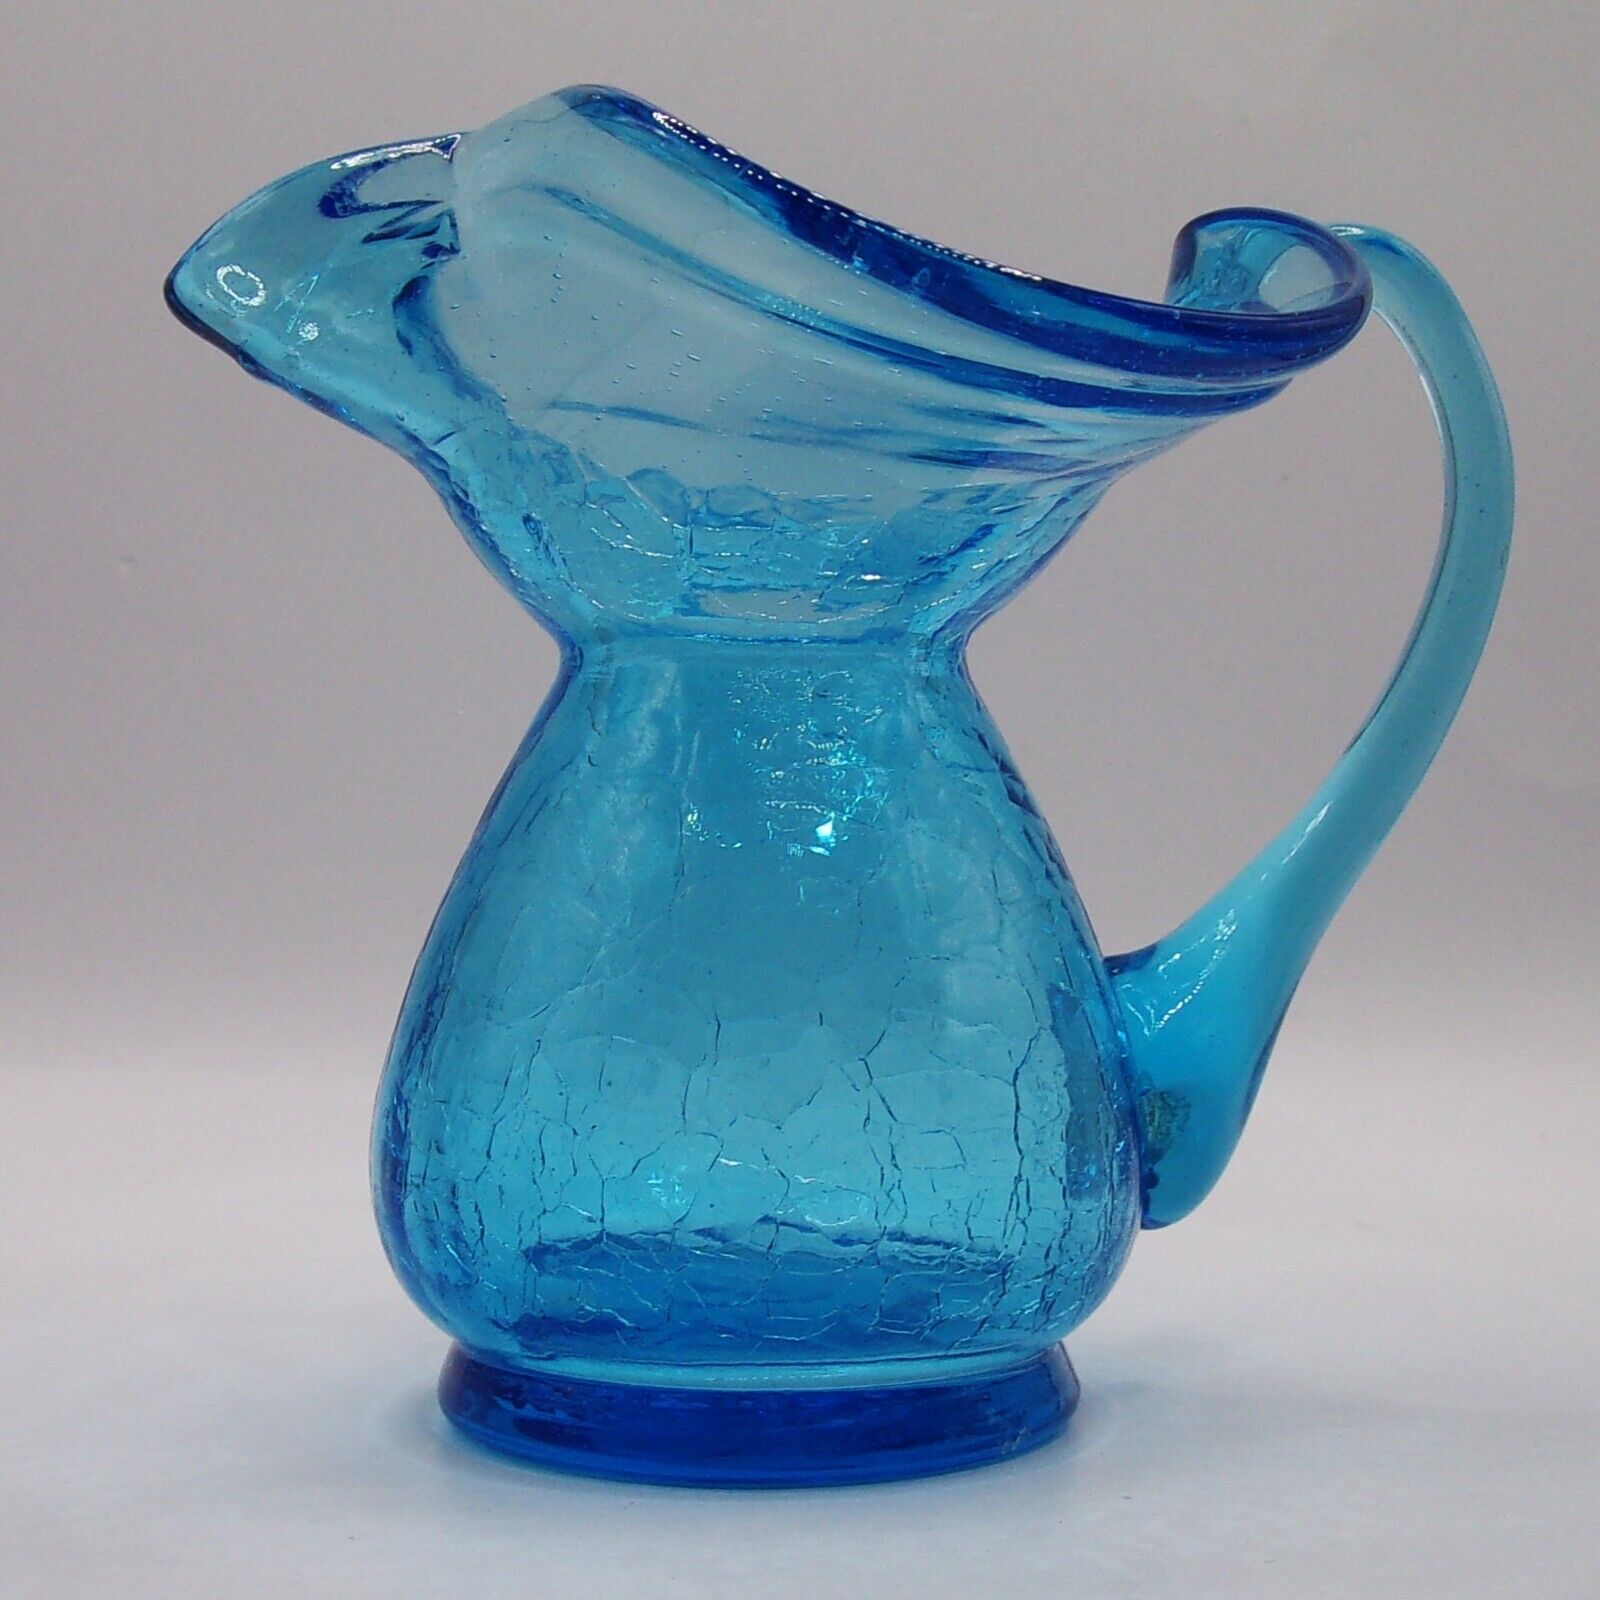 Vintage Blue Glass Pitcher / Vase Turquoise Hand Blown Crackle Glass by Blenko